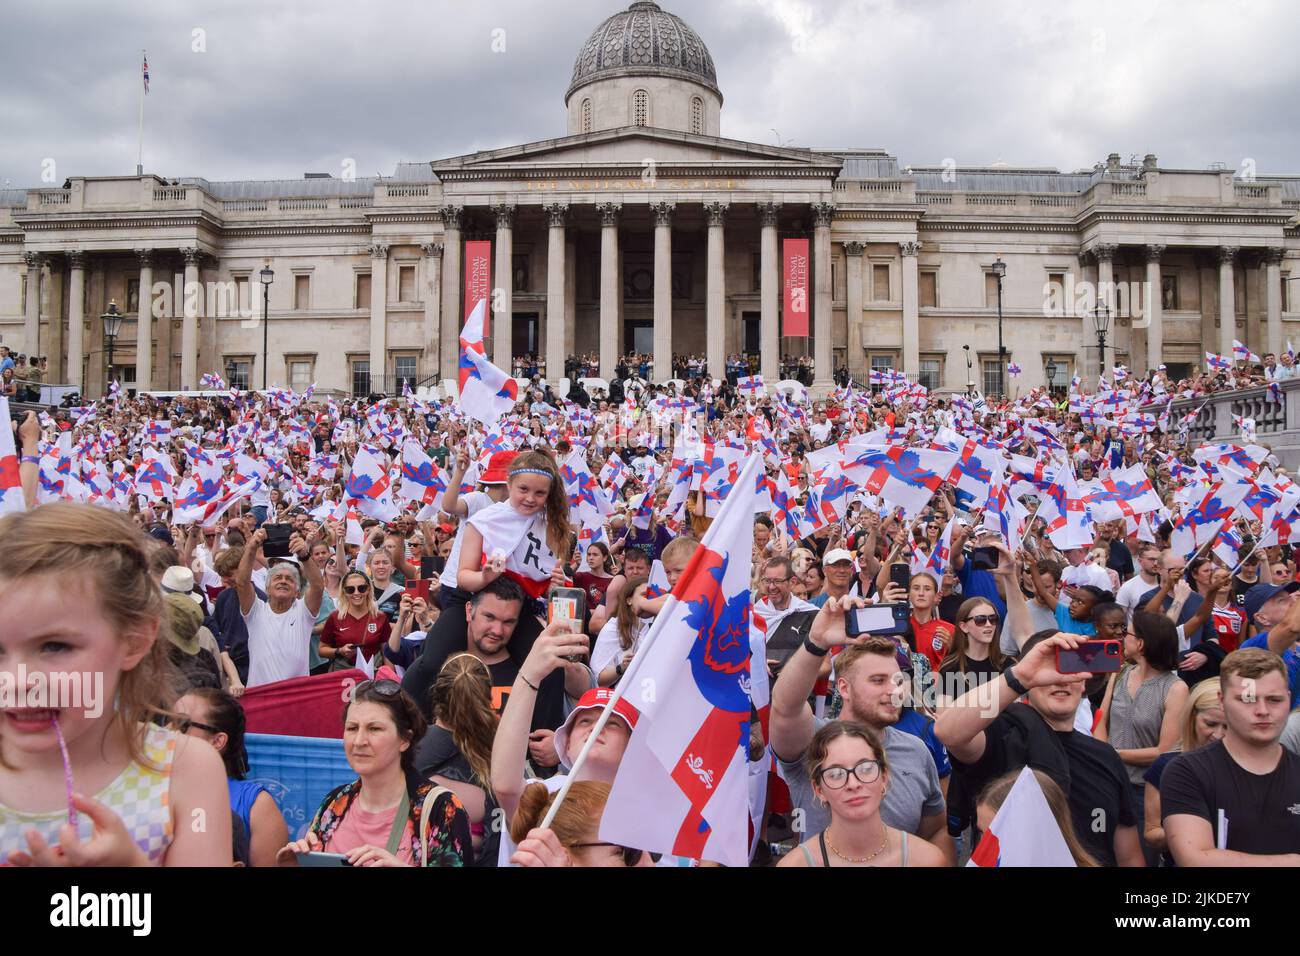 London, UK. 1st August 2022. Thousands of people gathered in Trafalgar Square to celebrate the England team - the Lionesses -  winning Women's Euro 2022 football tournament. Stock Photo